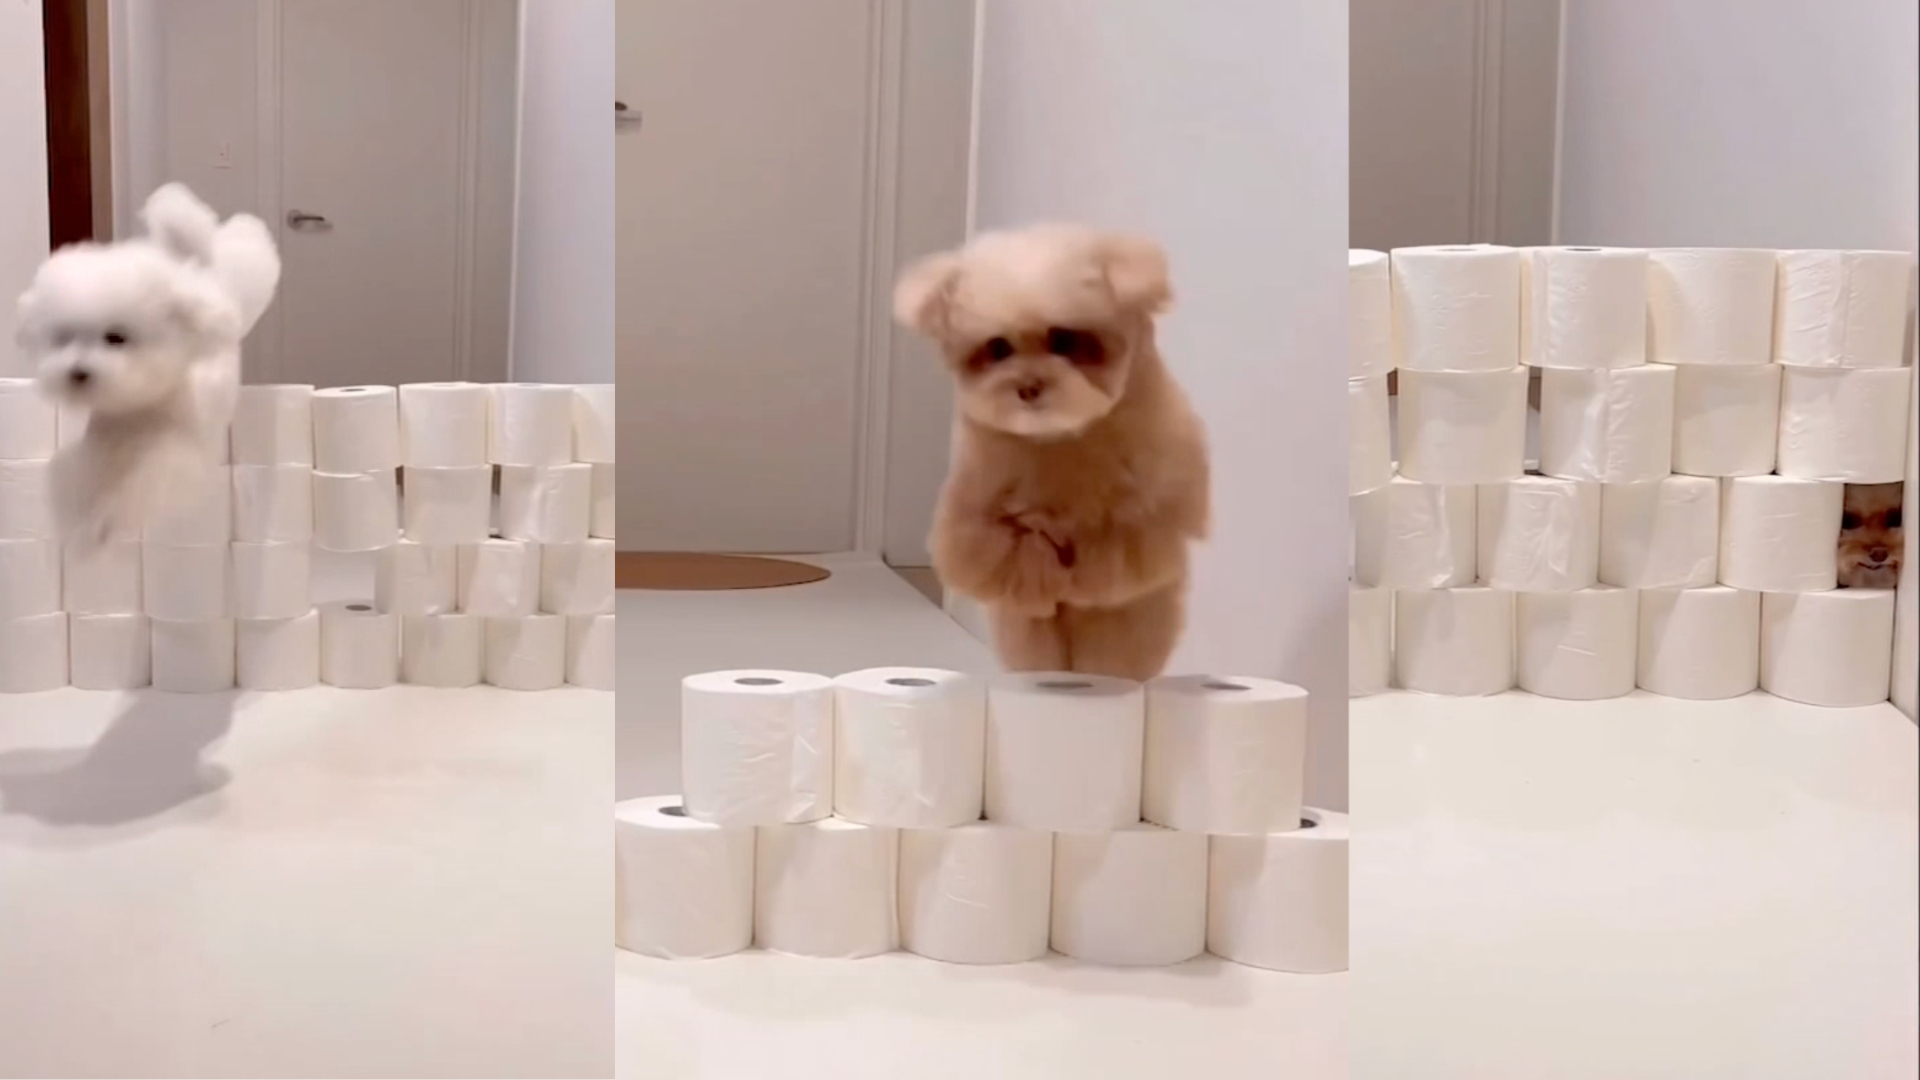 These adorable puppies can jump over toilet paper